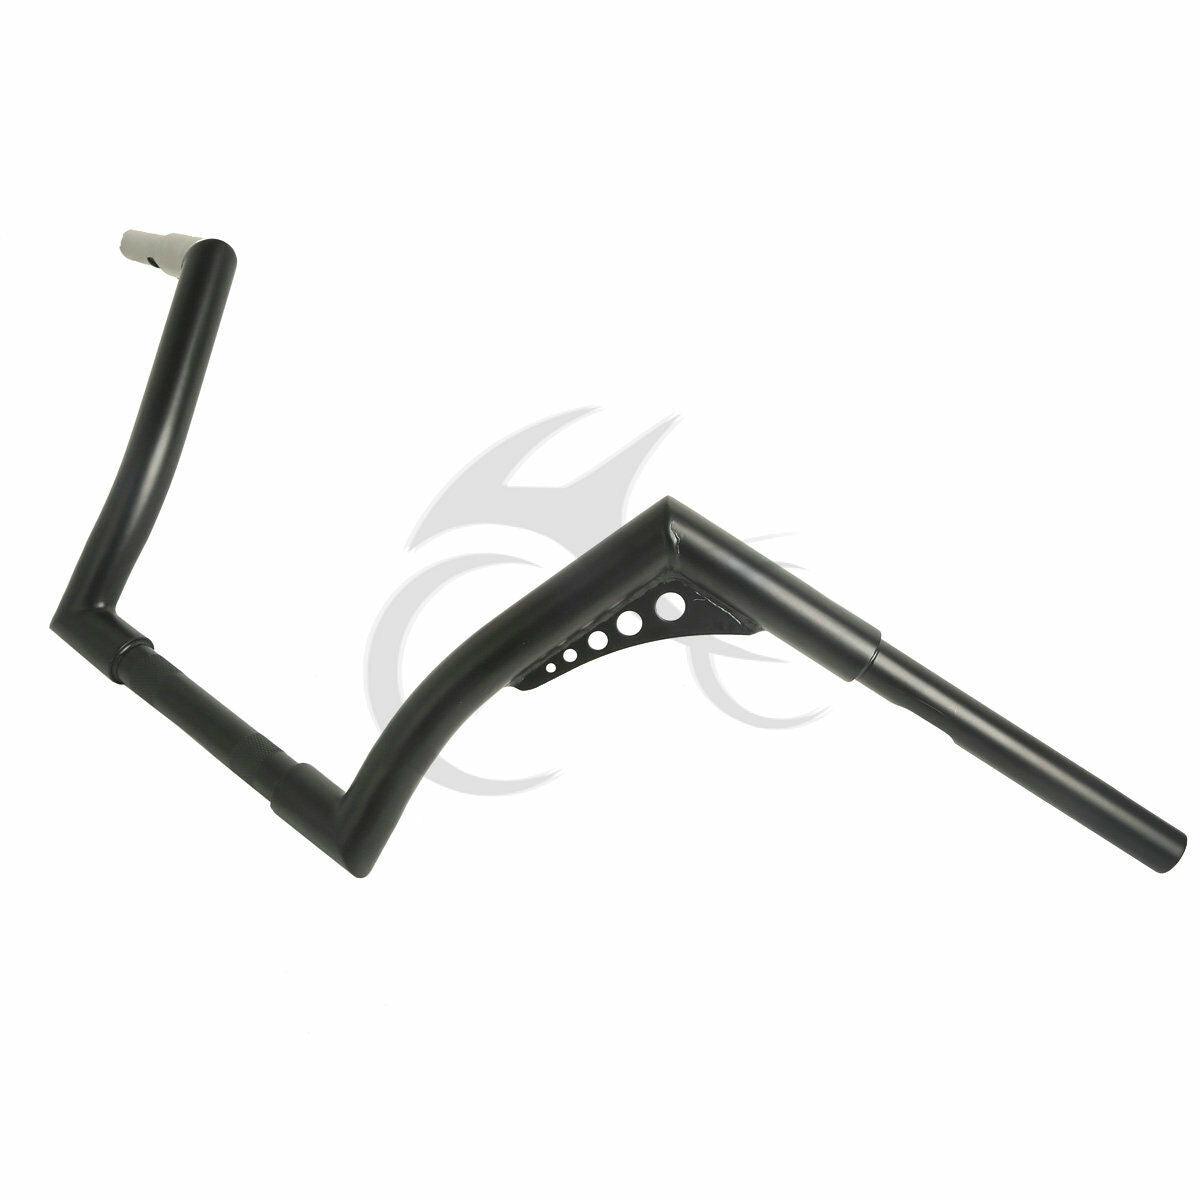 1" Fat 10" Rise Handlebar Fit For Harley Davidson Softail Sportster XL1200 883 - Moto Life Products